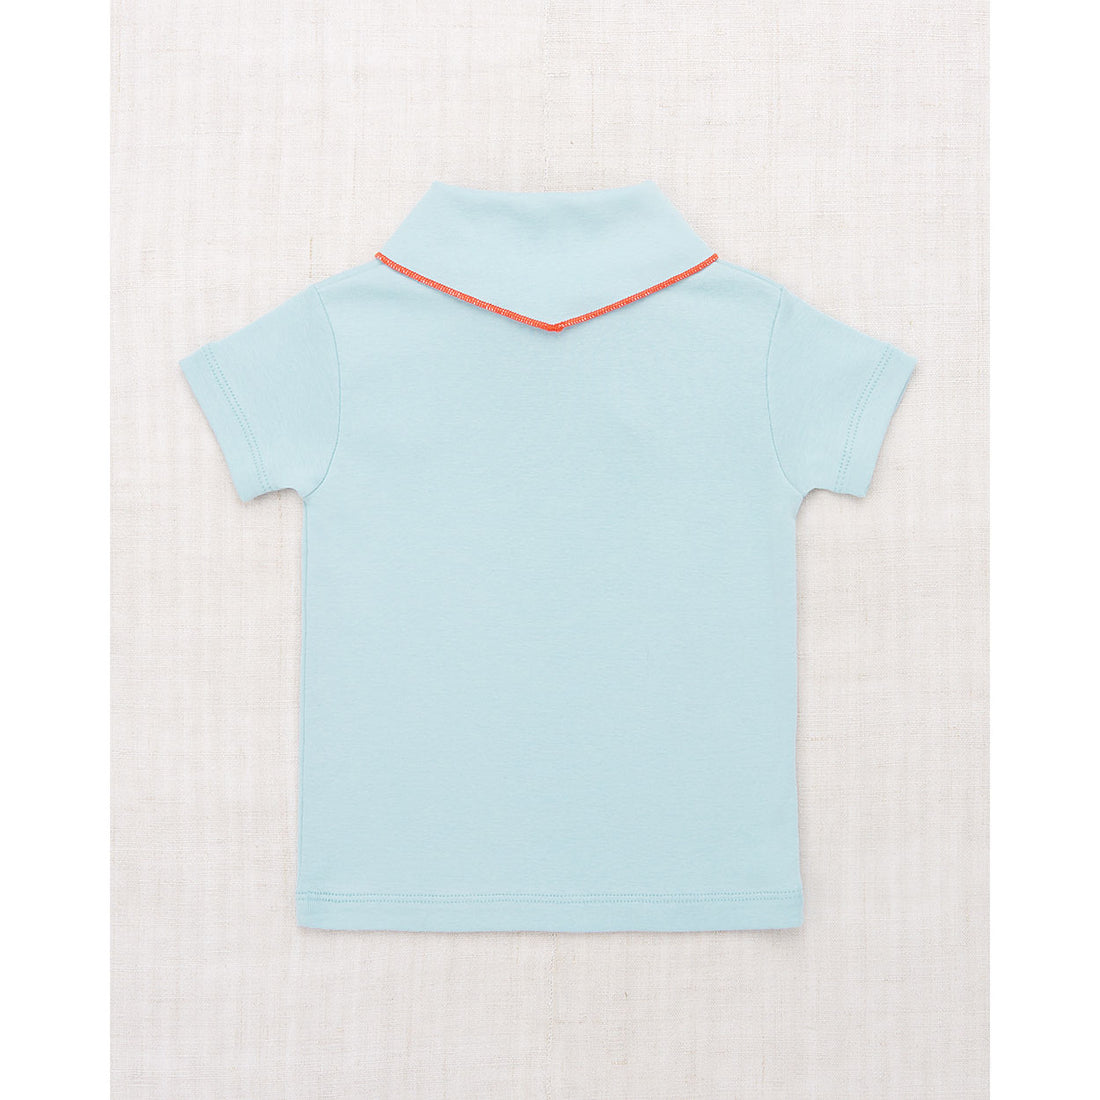 Misha and Puff Sky Scout Tee